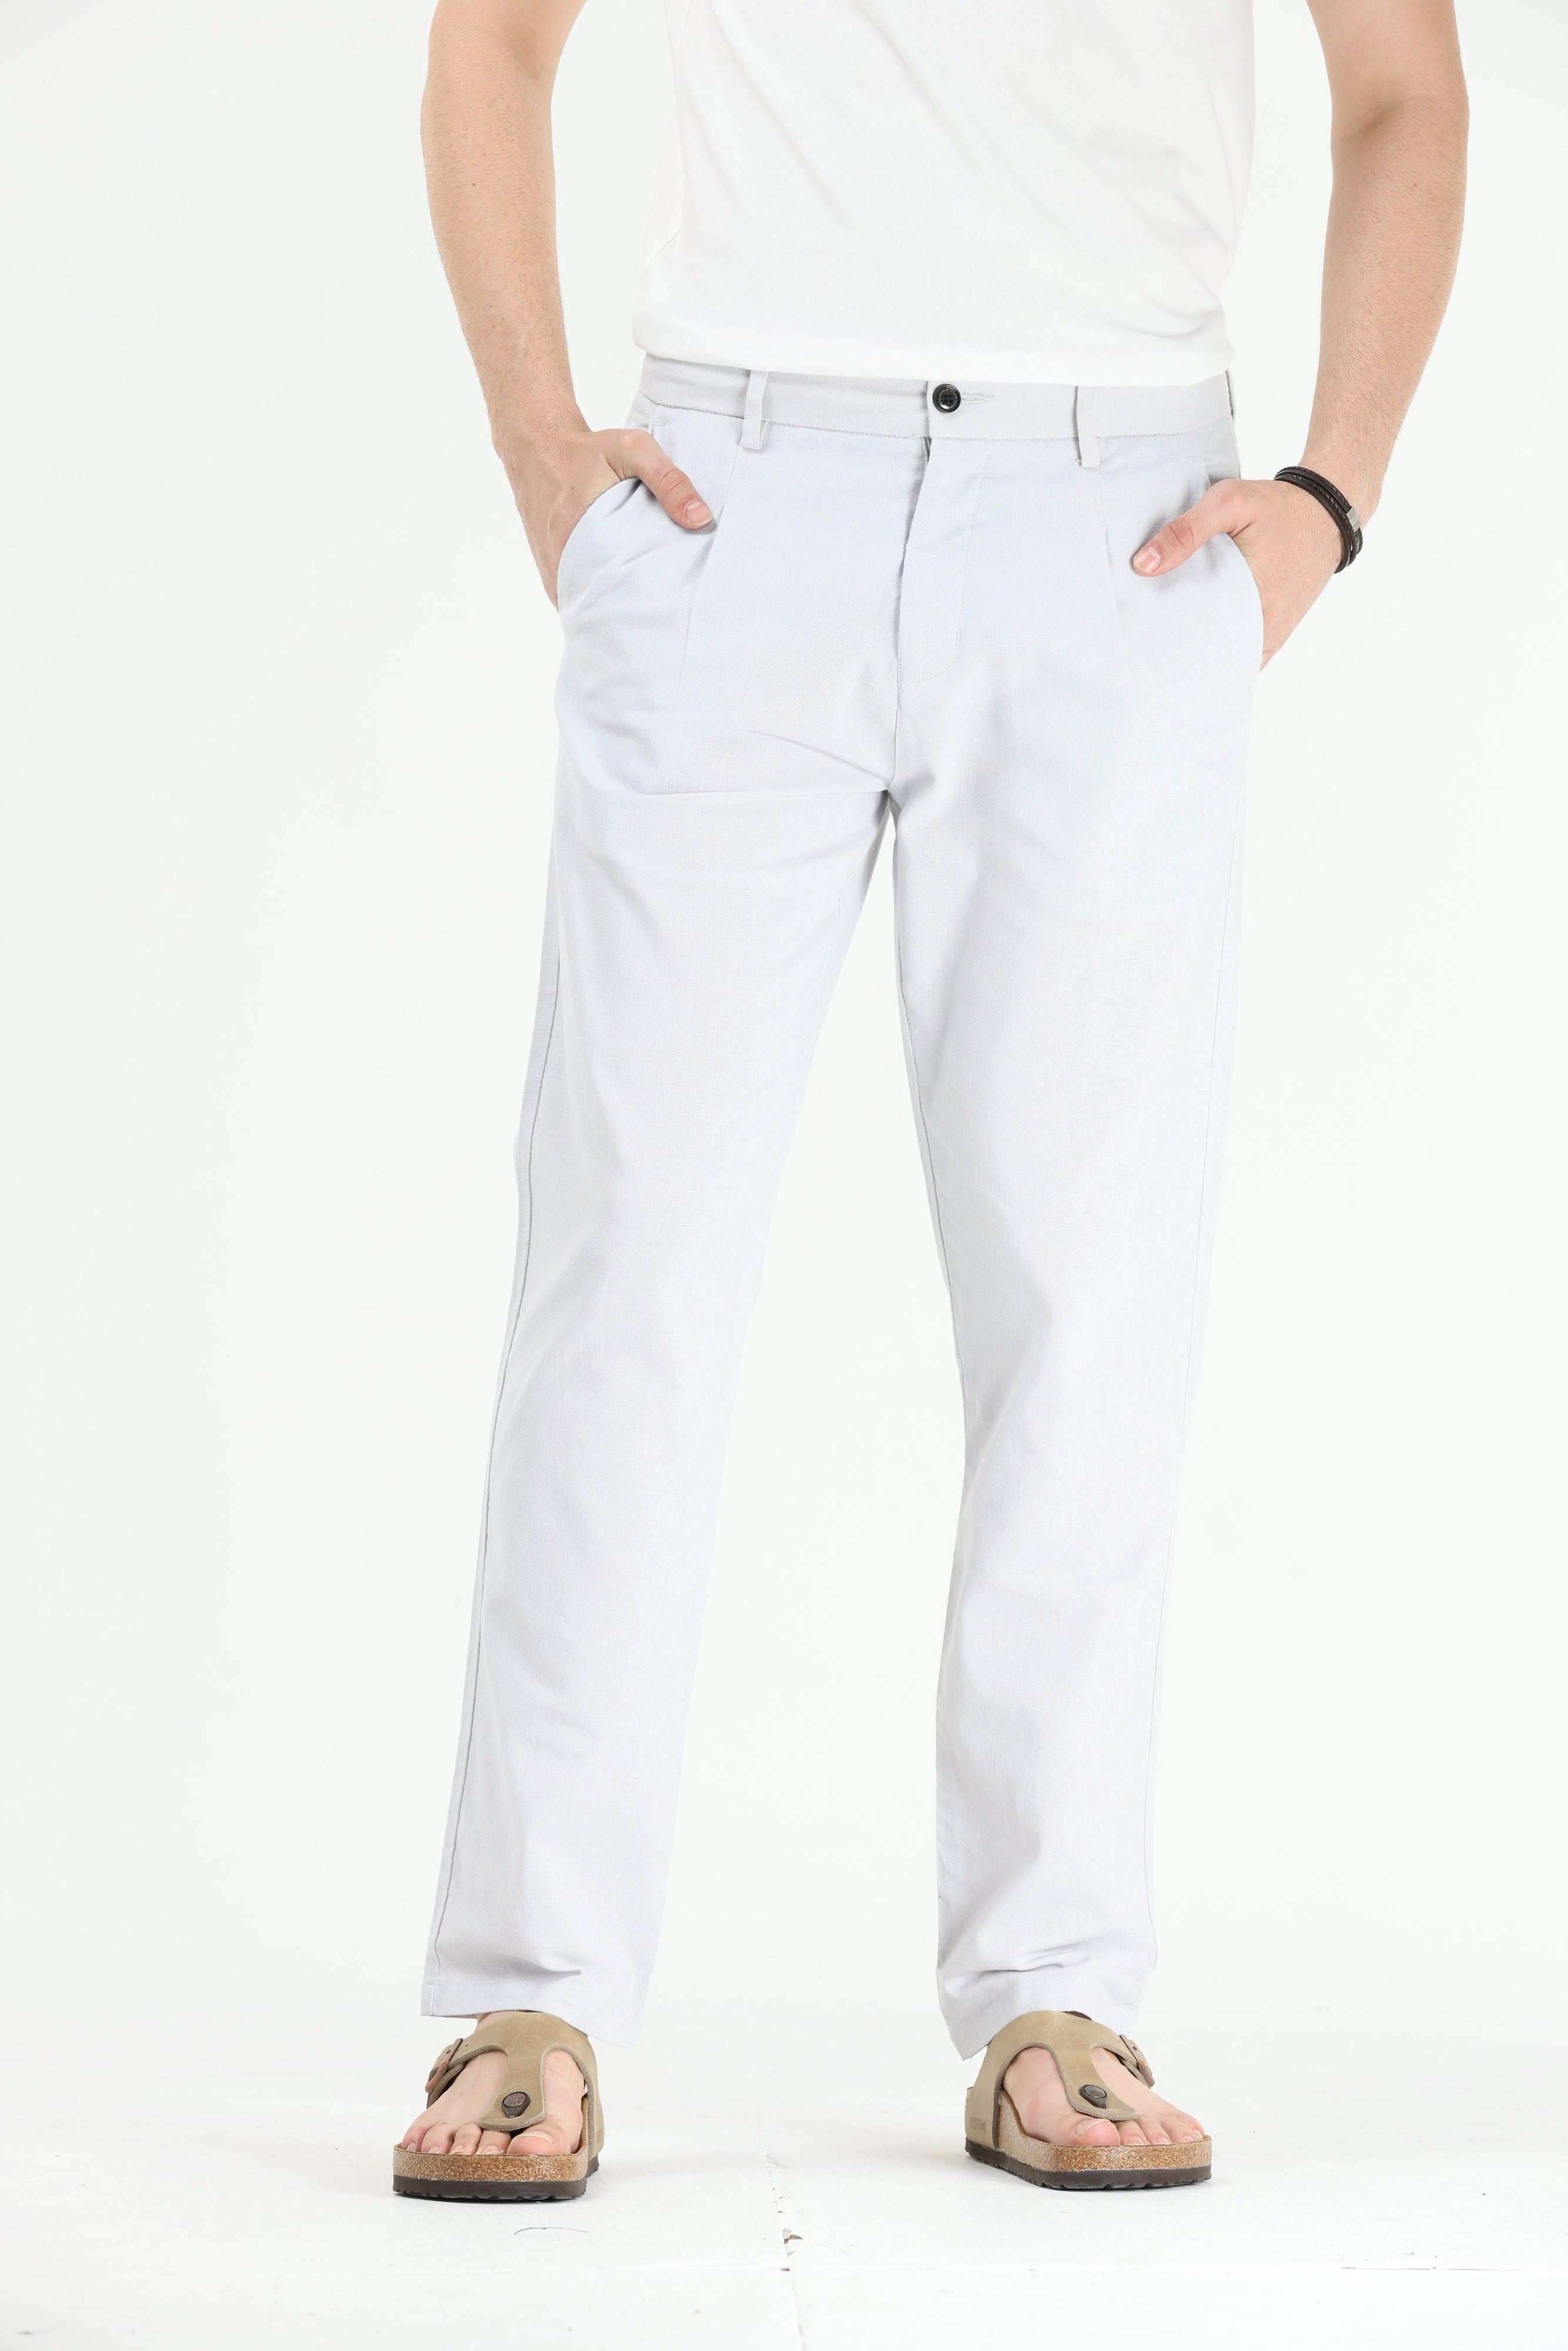 Shop Stylish Cream Pleated Pants Online at Great Price